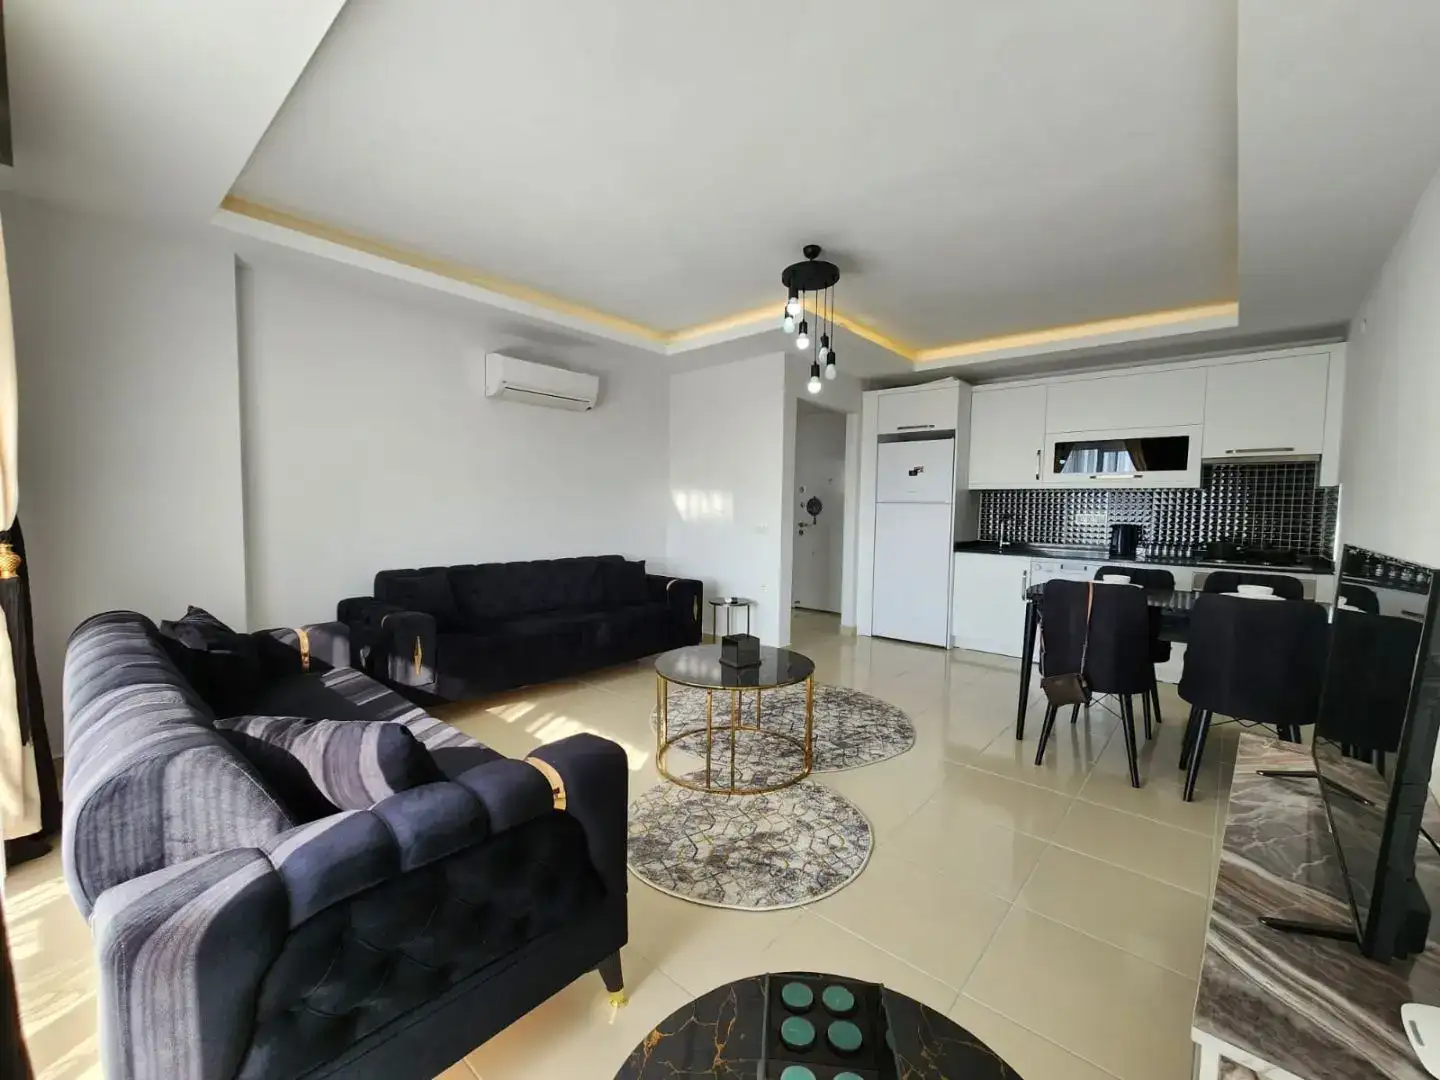 FULLY FURNİSHED APARTMENT FOR SALE İN MAHMUTLAR-ALANYA-FUL ACTİVİTY